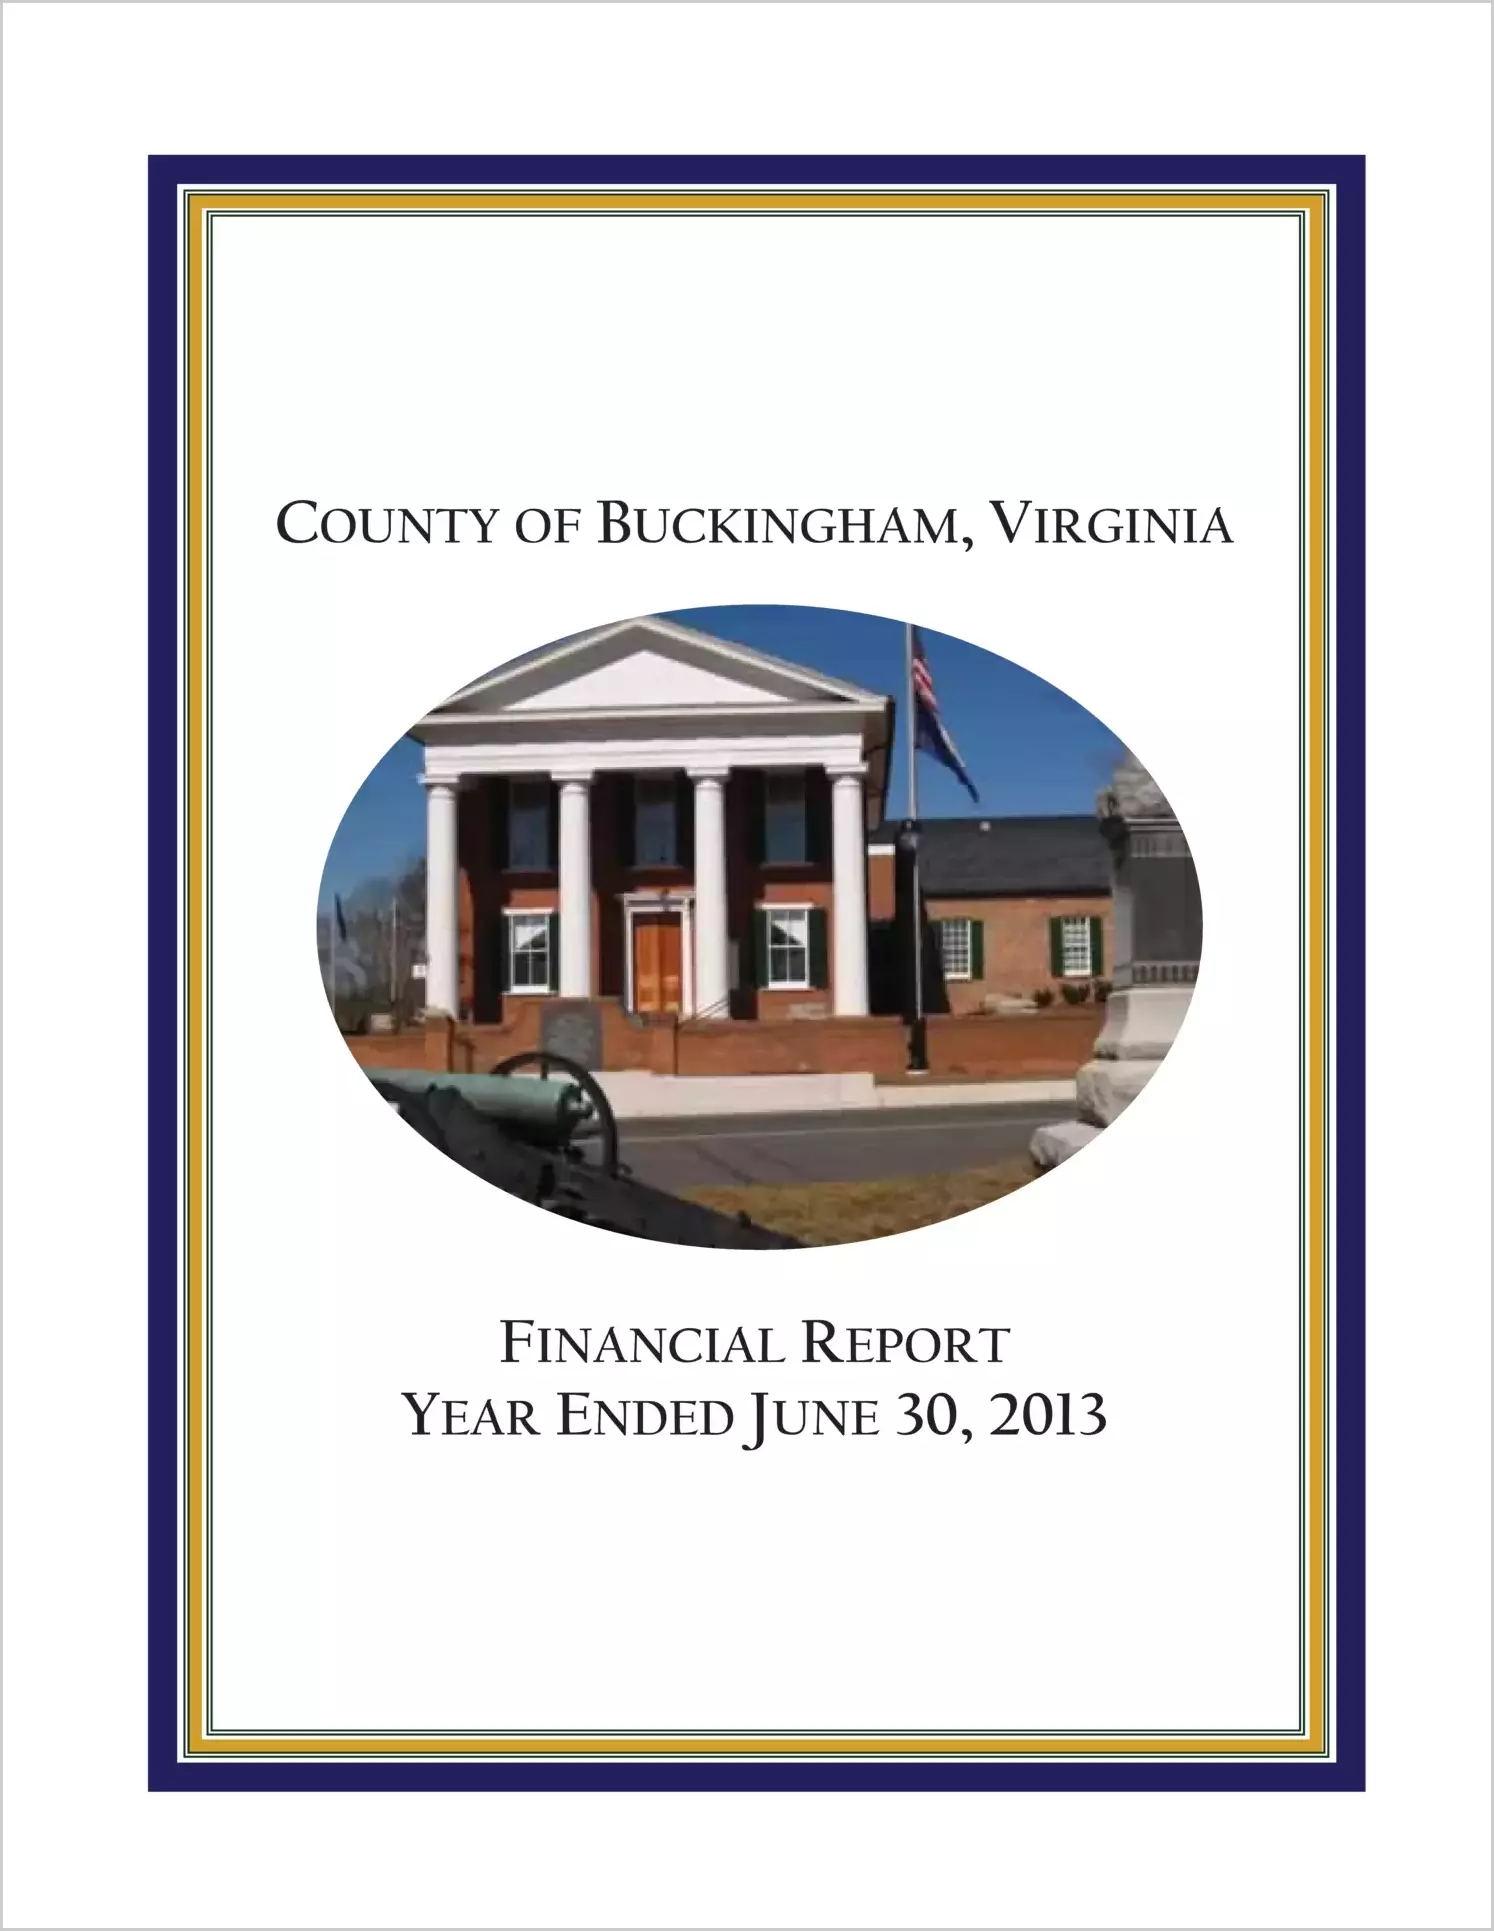 2013 Annual Financial Report for County of Buckingham